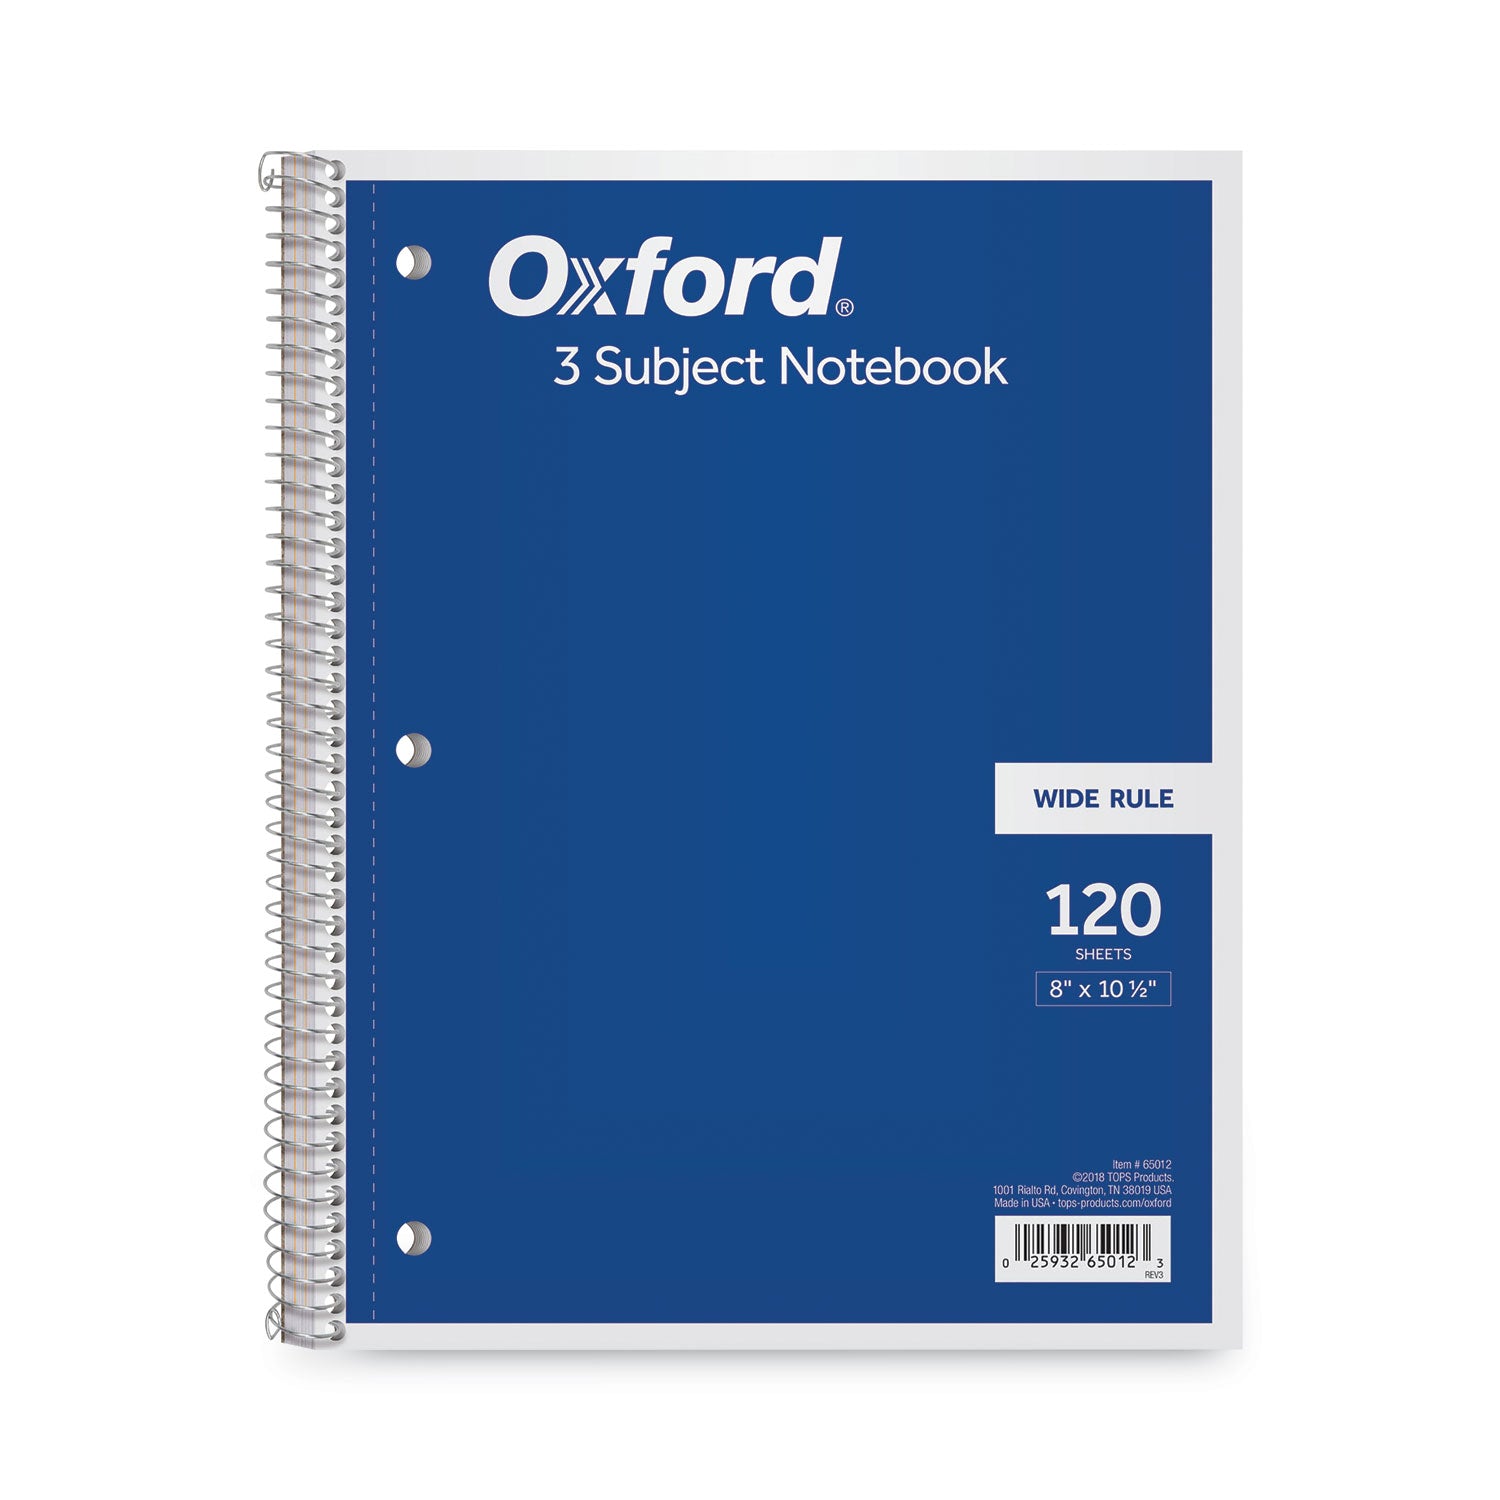 coil-lock-wirebound-notebooks-3-hole-punched-3-subject-wide-legal-rule-randomly-assorted-covers-120-105-x-8-sheets_top65012 - 1